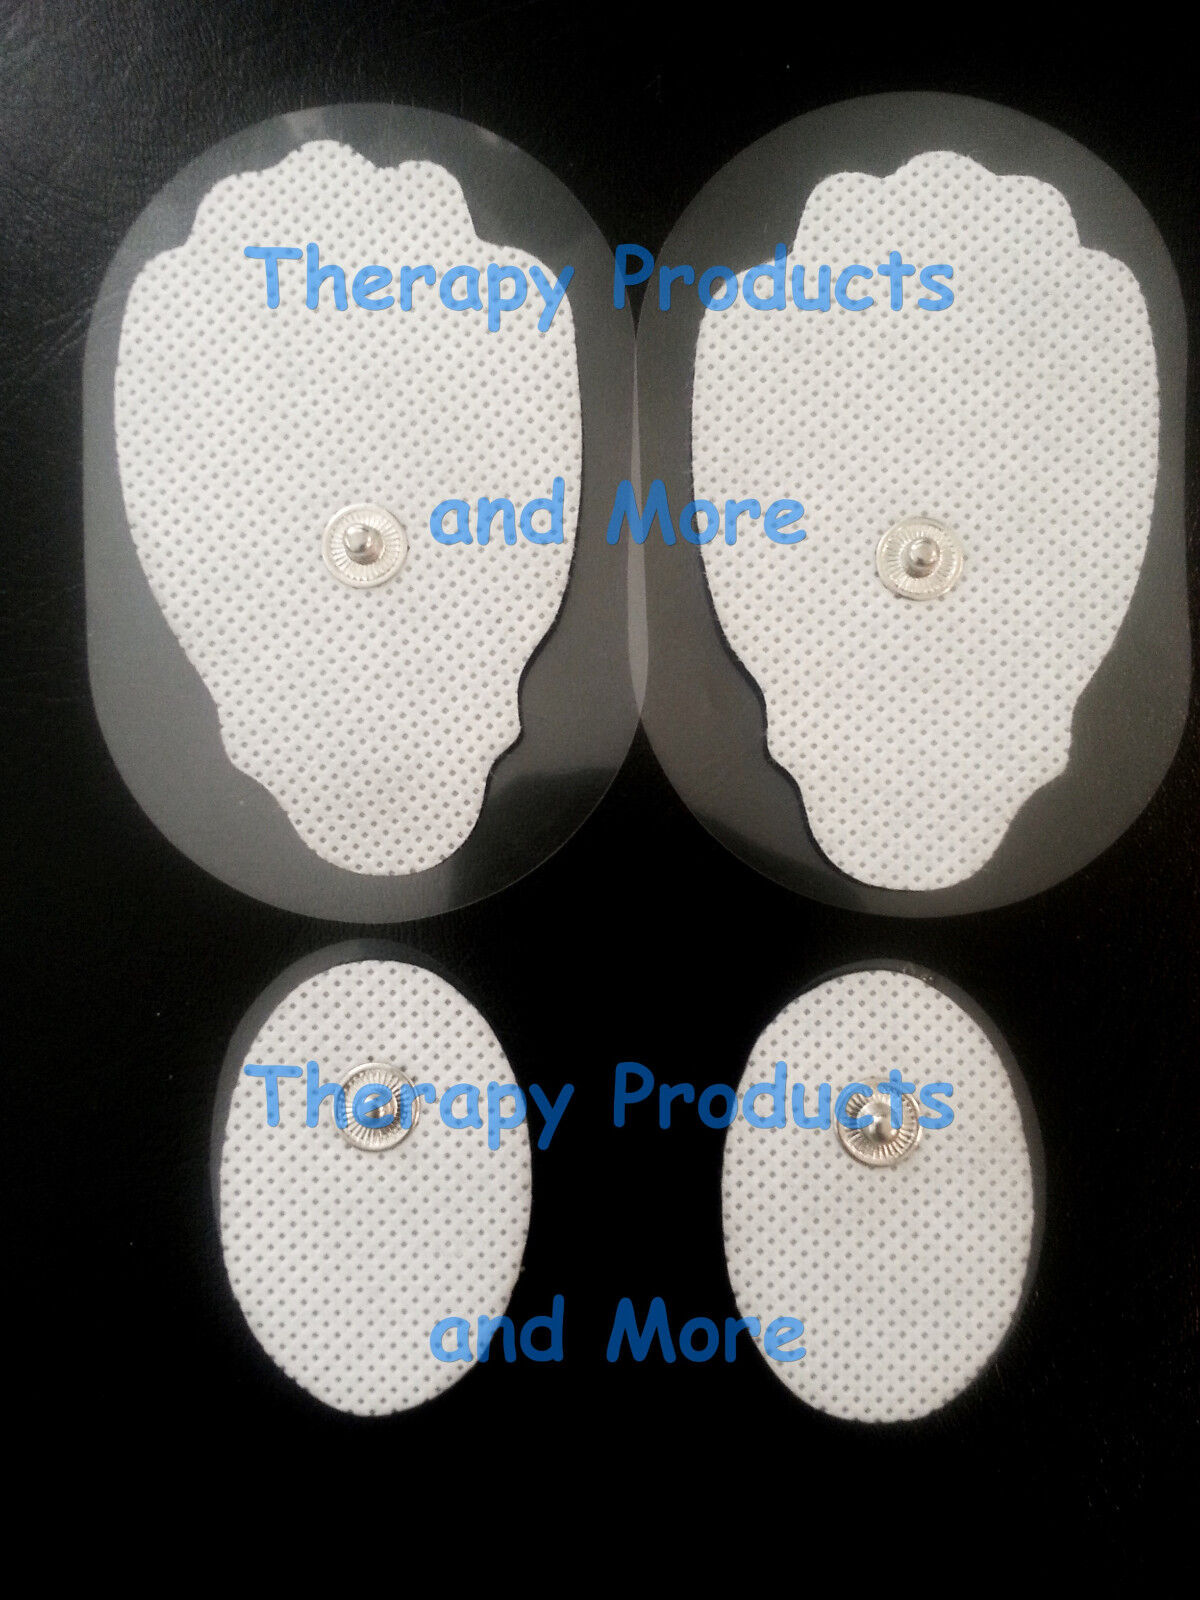 Large-scale sale REPLACEMENT ELECTRODE PADS COMBO 2 discount LG SM HEALTH FOR HER OVAL